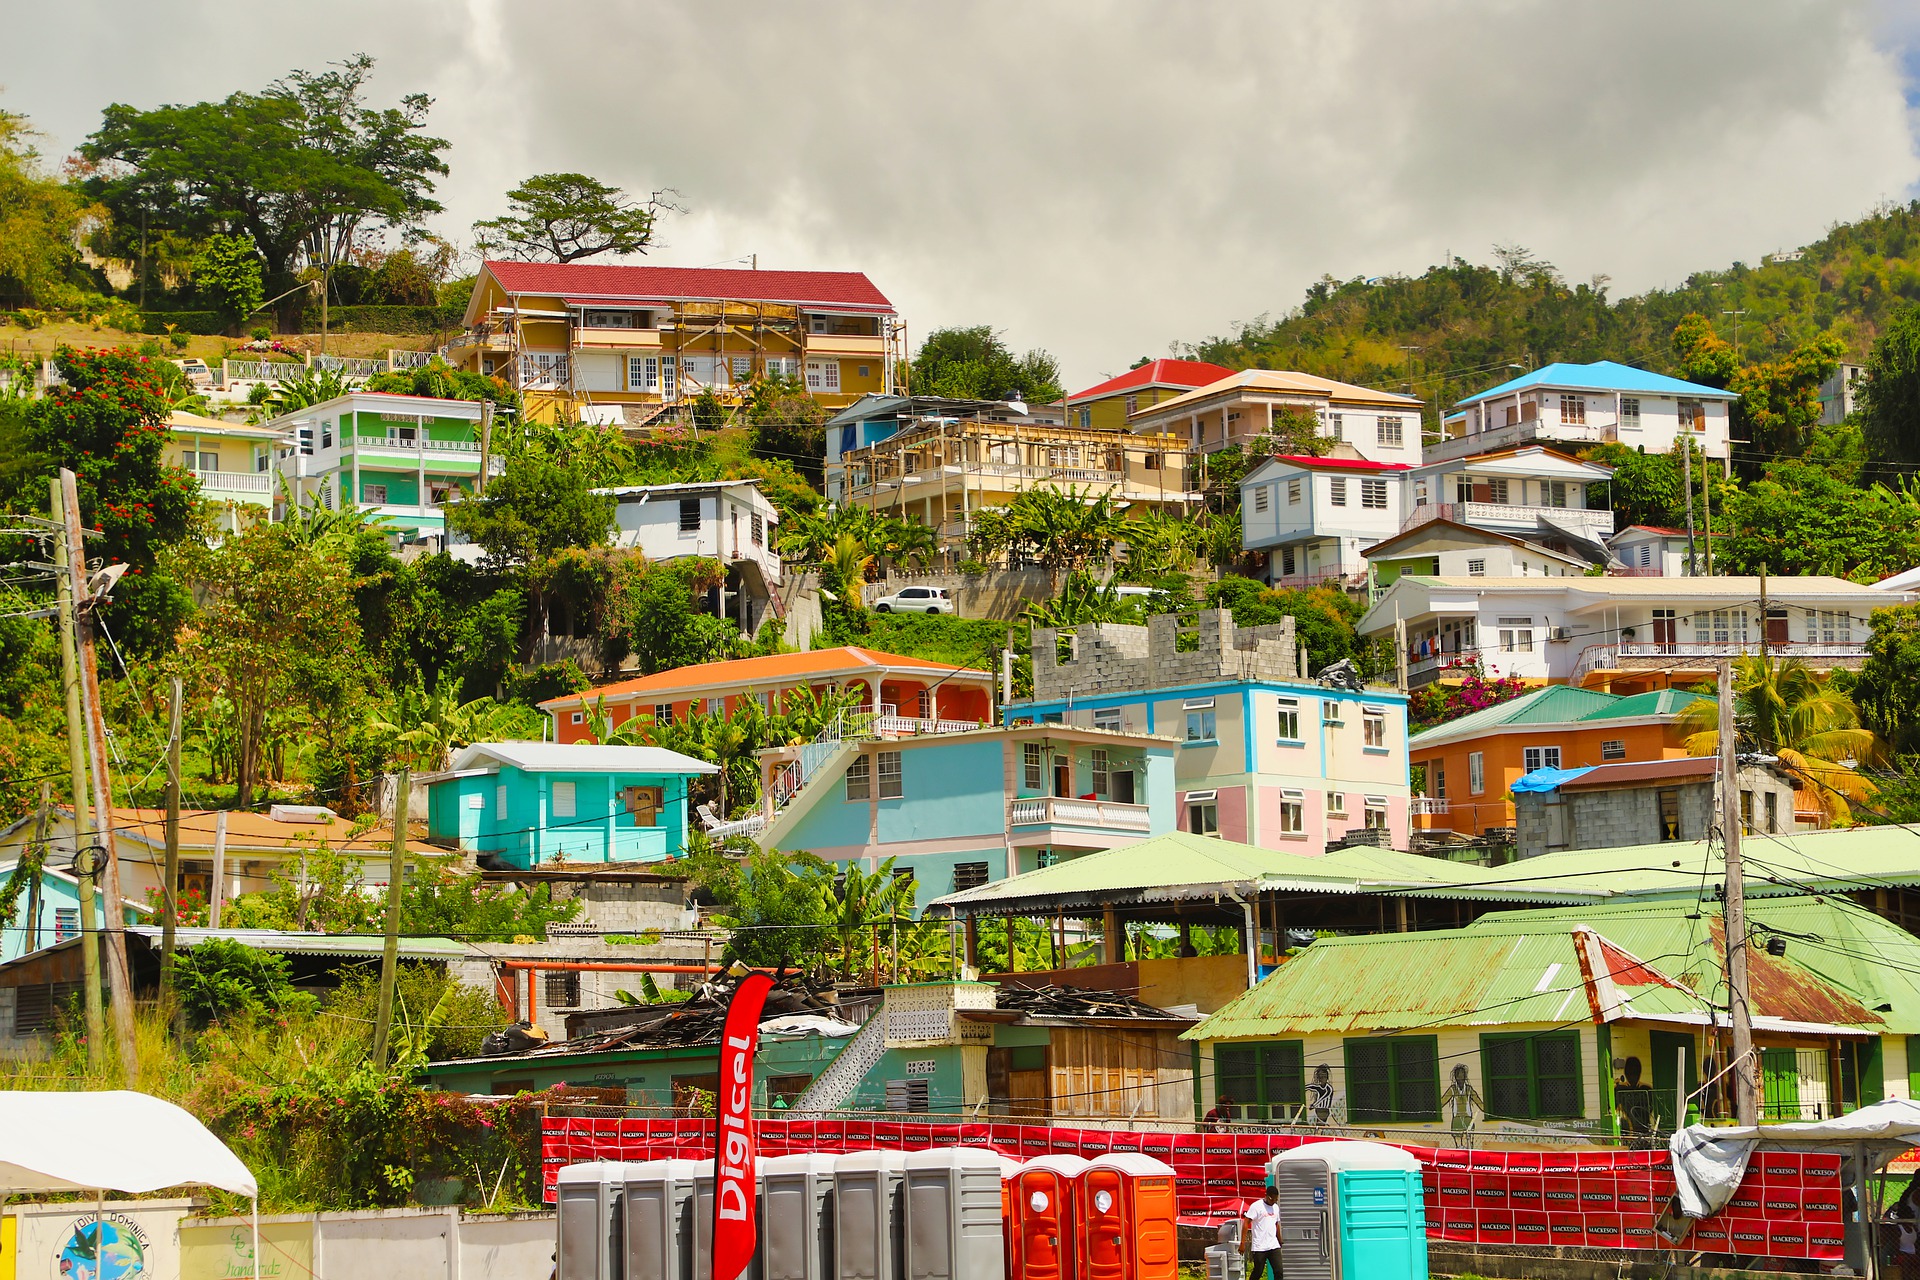 Dominica Is the Fastest Growing Economy in Latin America and the Caribbean Region Thanks to Booming Tourism and Citizenship by Investment, UN ECLAC Report Finds